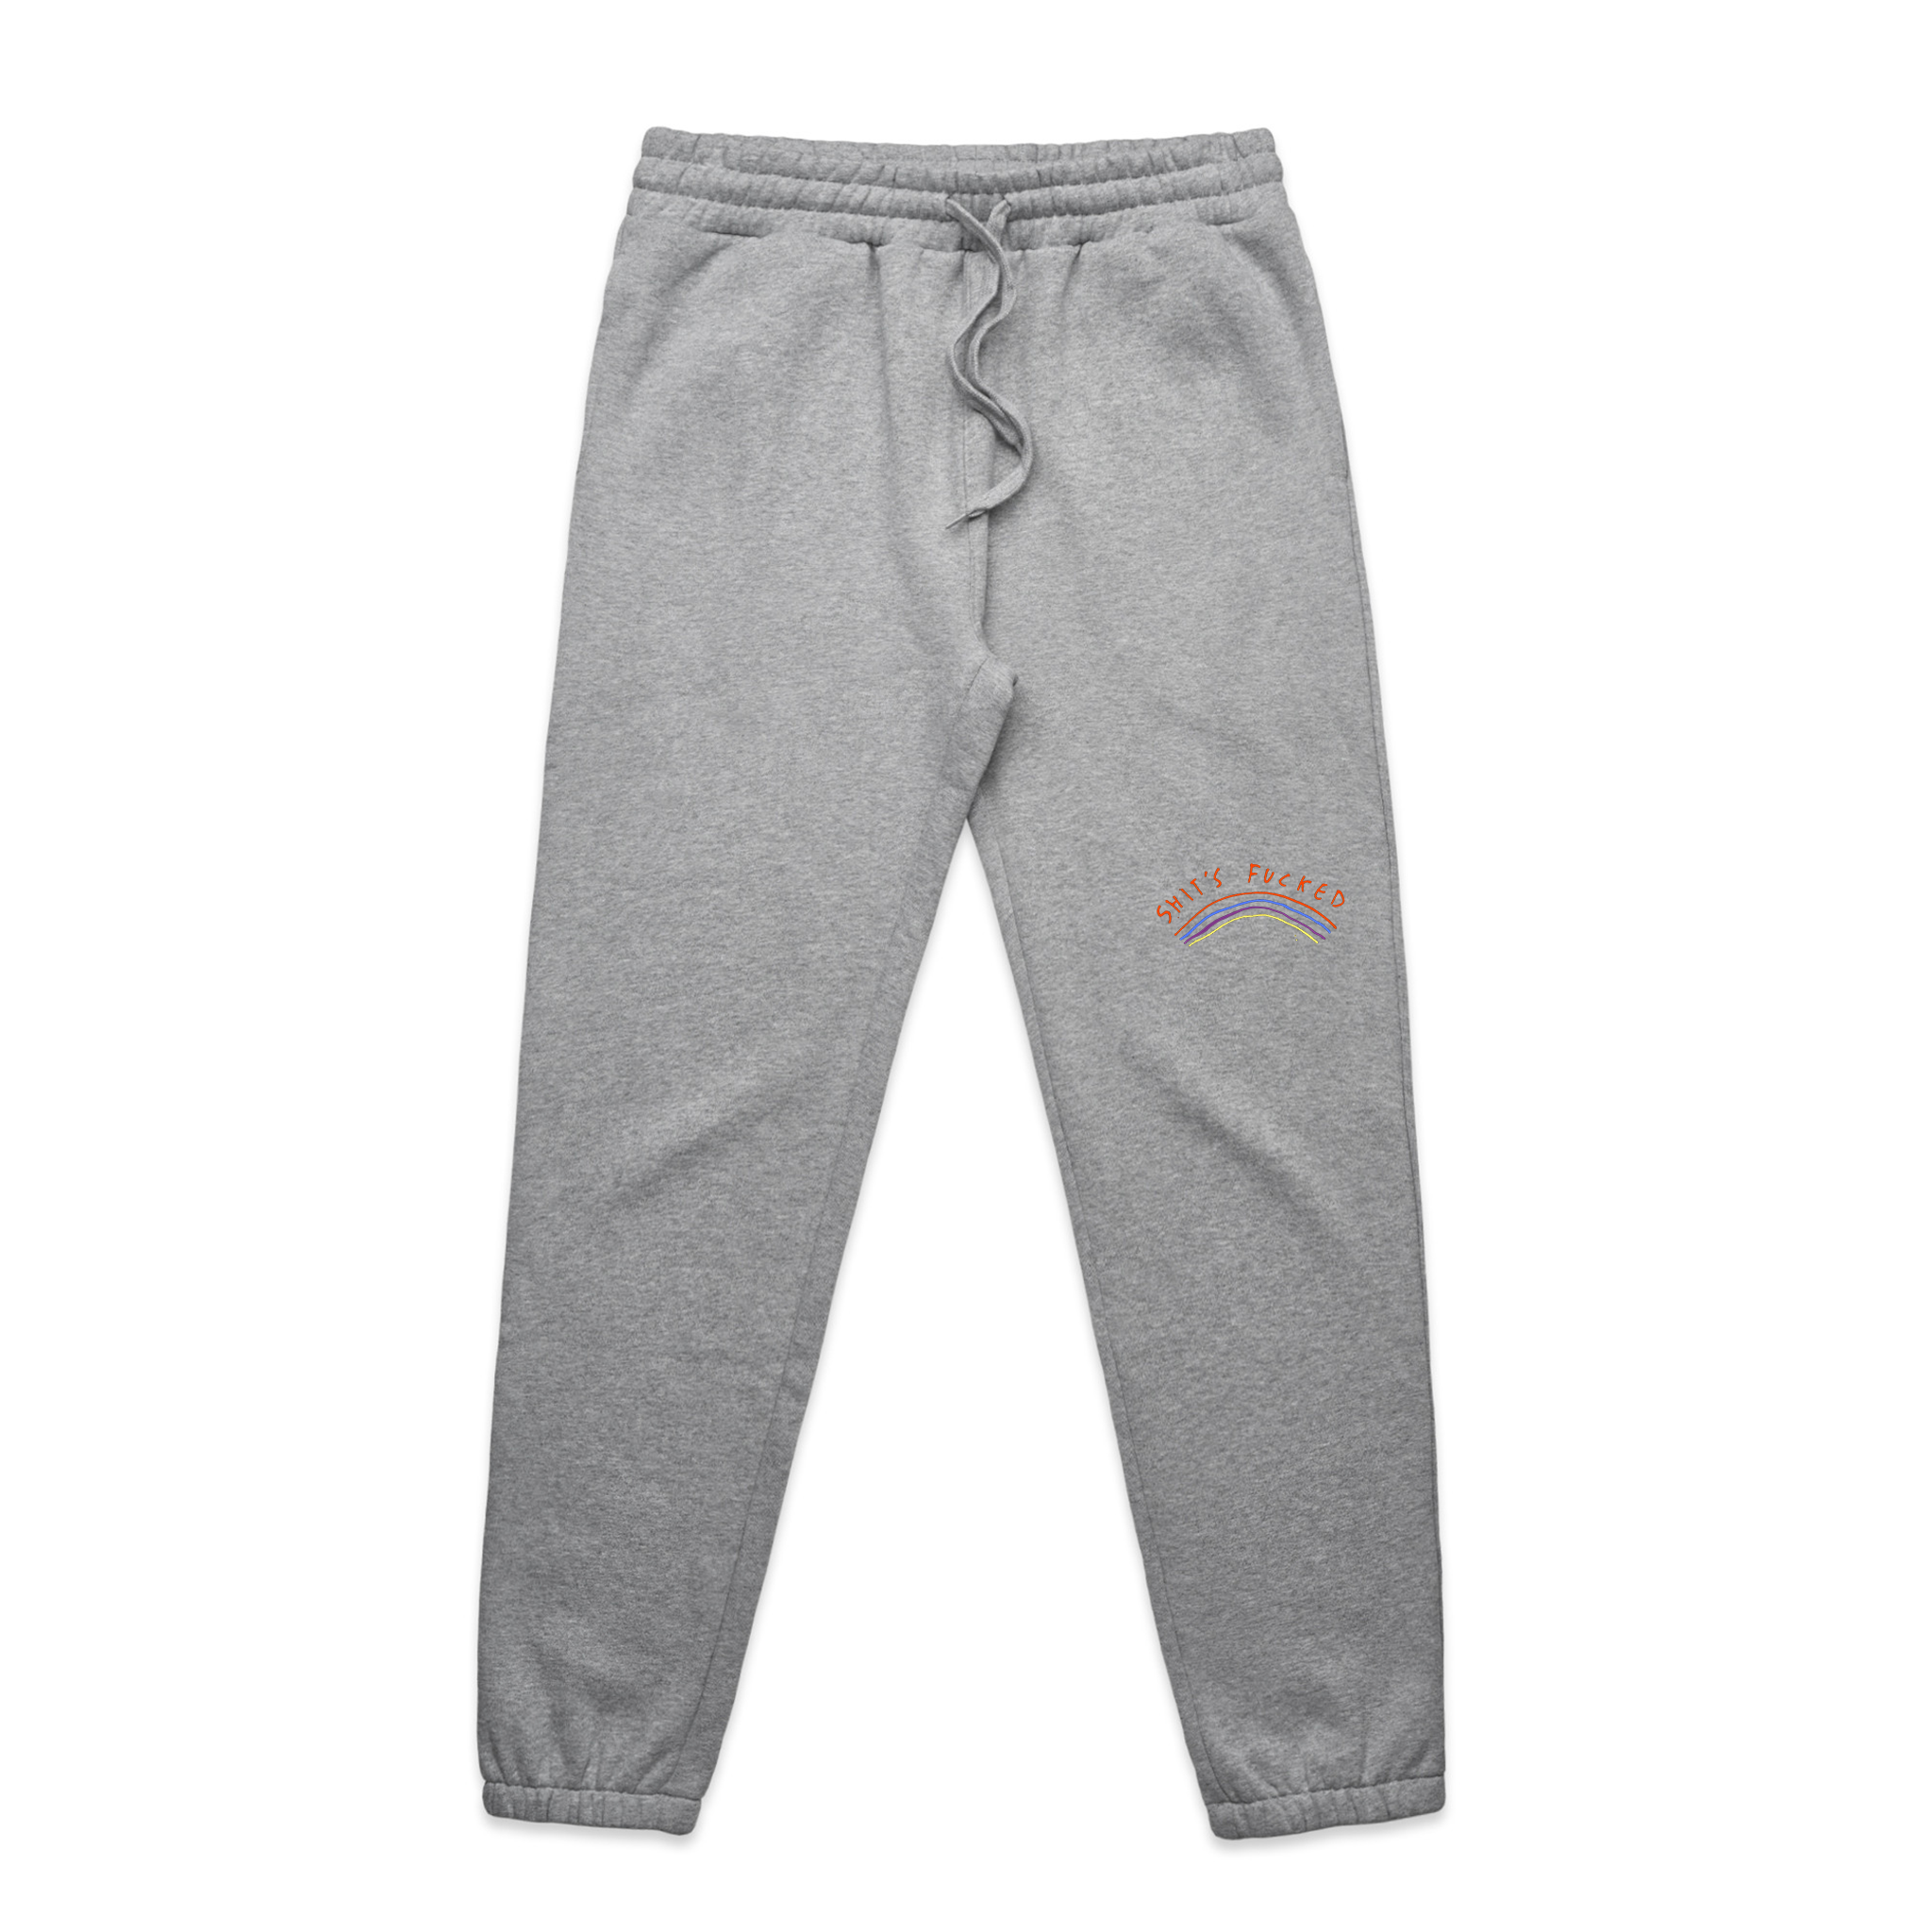 Shit's Fucked Track Pants